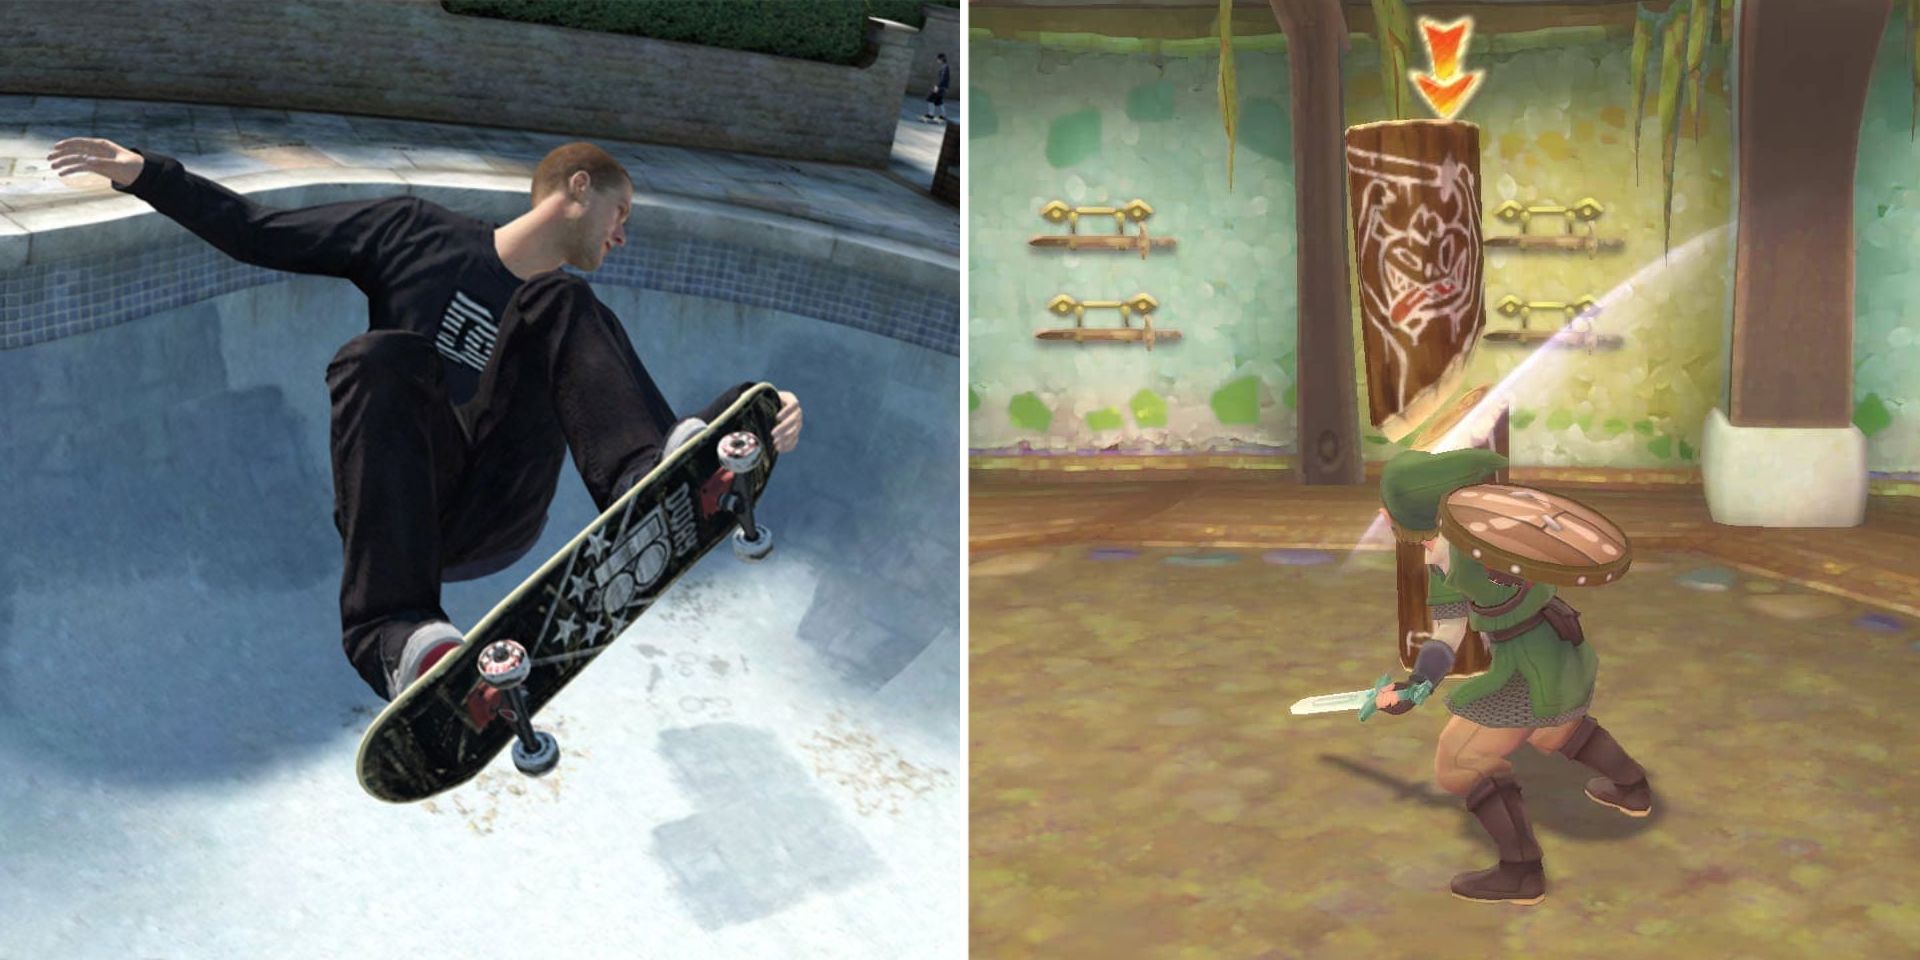 Skateboarder performing a trick in Skate 3 while Link slices a training totem in The Legend of Zelda Skyward Sword HD